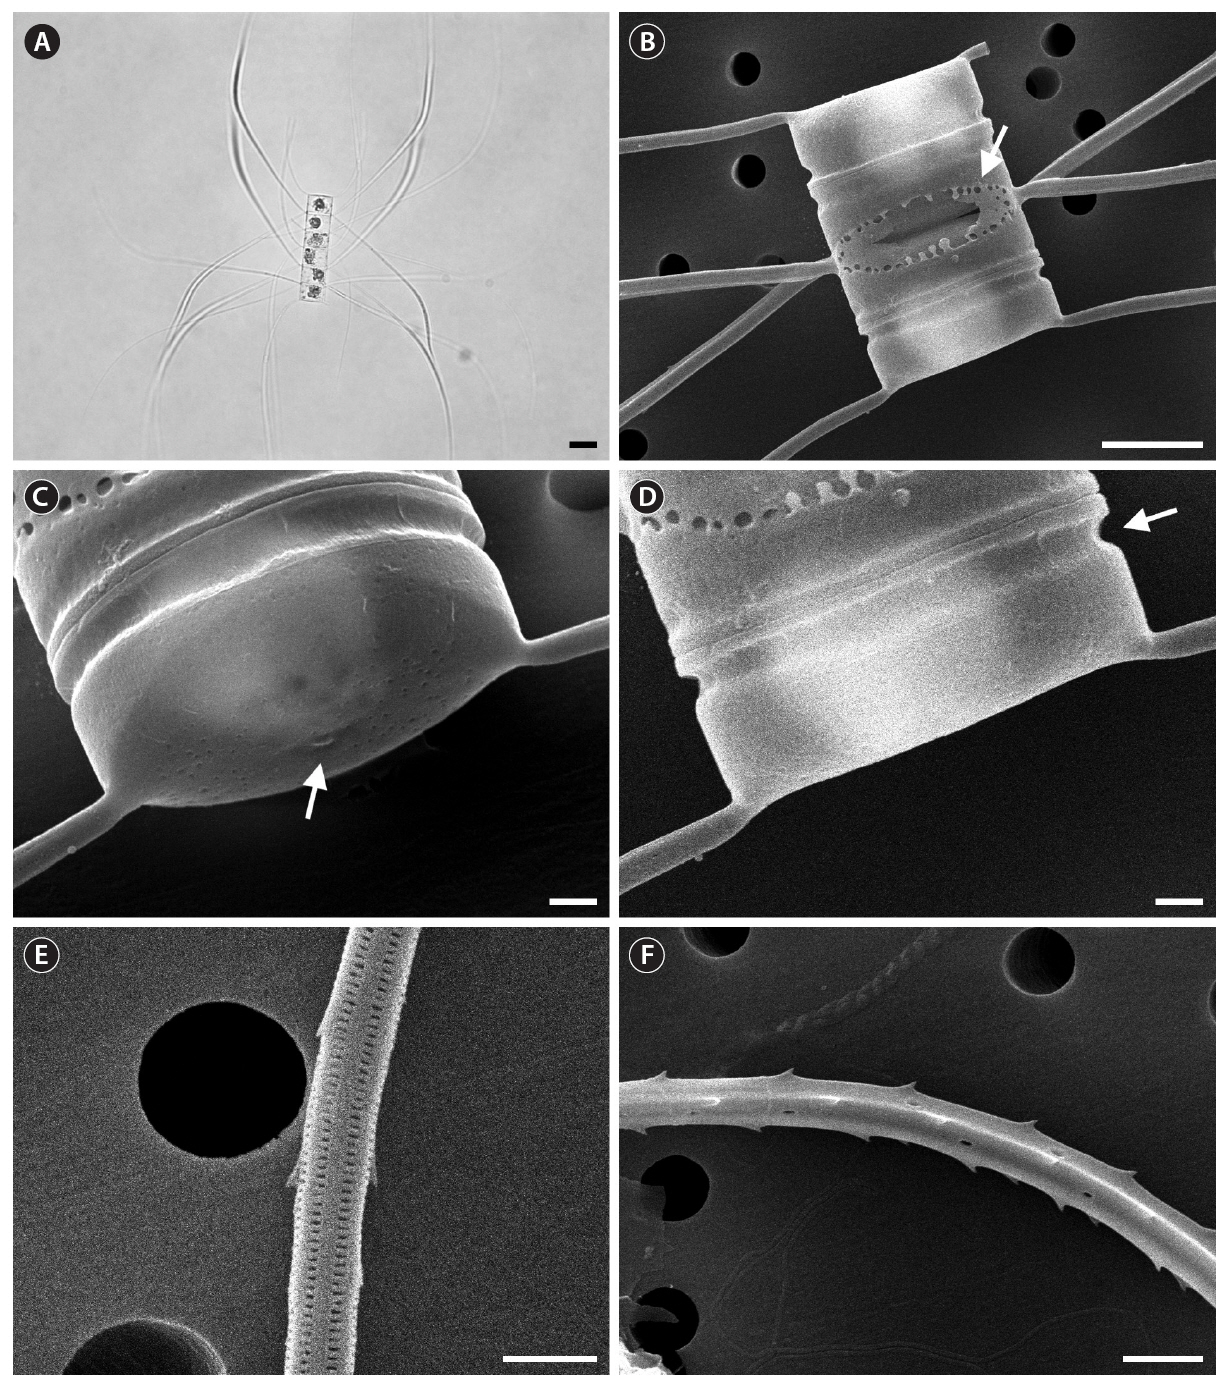 Chaetoceros diversus (A light microscope; B-F scanning electron microscope). (A) Five-celled chain with terminal common intercalary and special intercalary setae and 1 chloroplast per cell. (B) Two-celled colony having small poroids on mantles and absent or quite narrow foramina. (C) Rimoportula (arrow) within small depression at center of terminal valve. (D) Constricted valve mantle (arrow) and flat valve surface. (E) Common intercalary setae with slitted poroids and fine spines. (F) Special intercalary setae with relatively few poroids and strong spines. Scale bars represent: A 10 ㎛; B 5 ㎛; C-E 1 ㎛; F 2 ㎛.